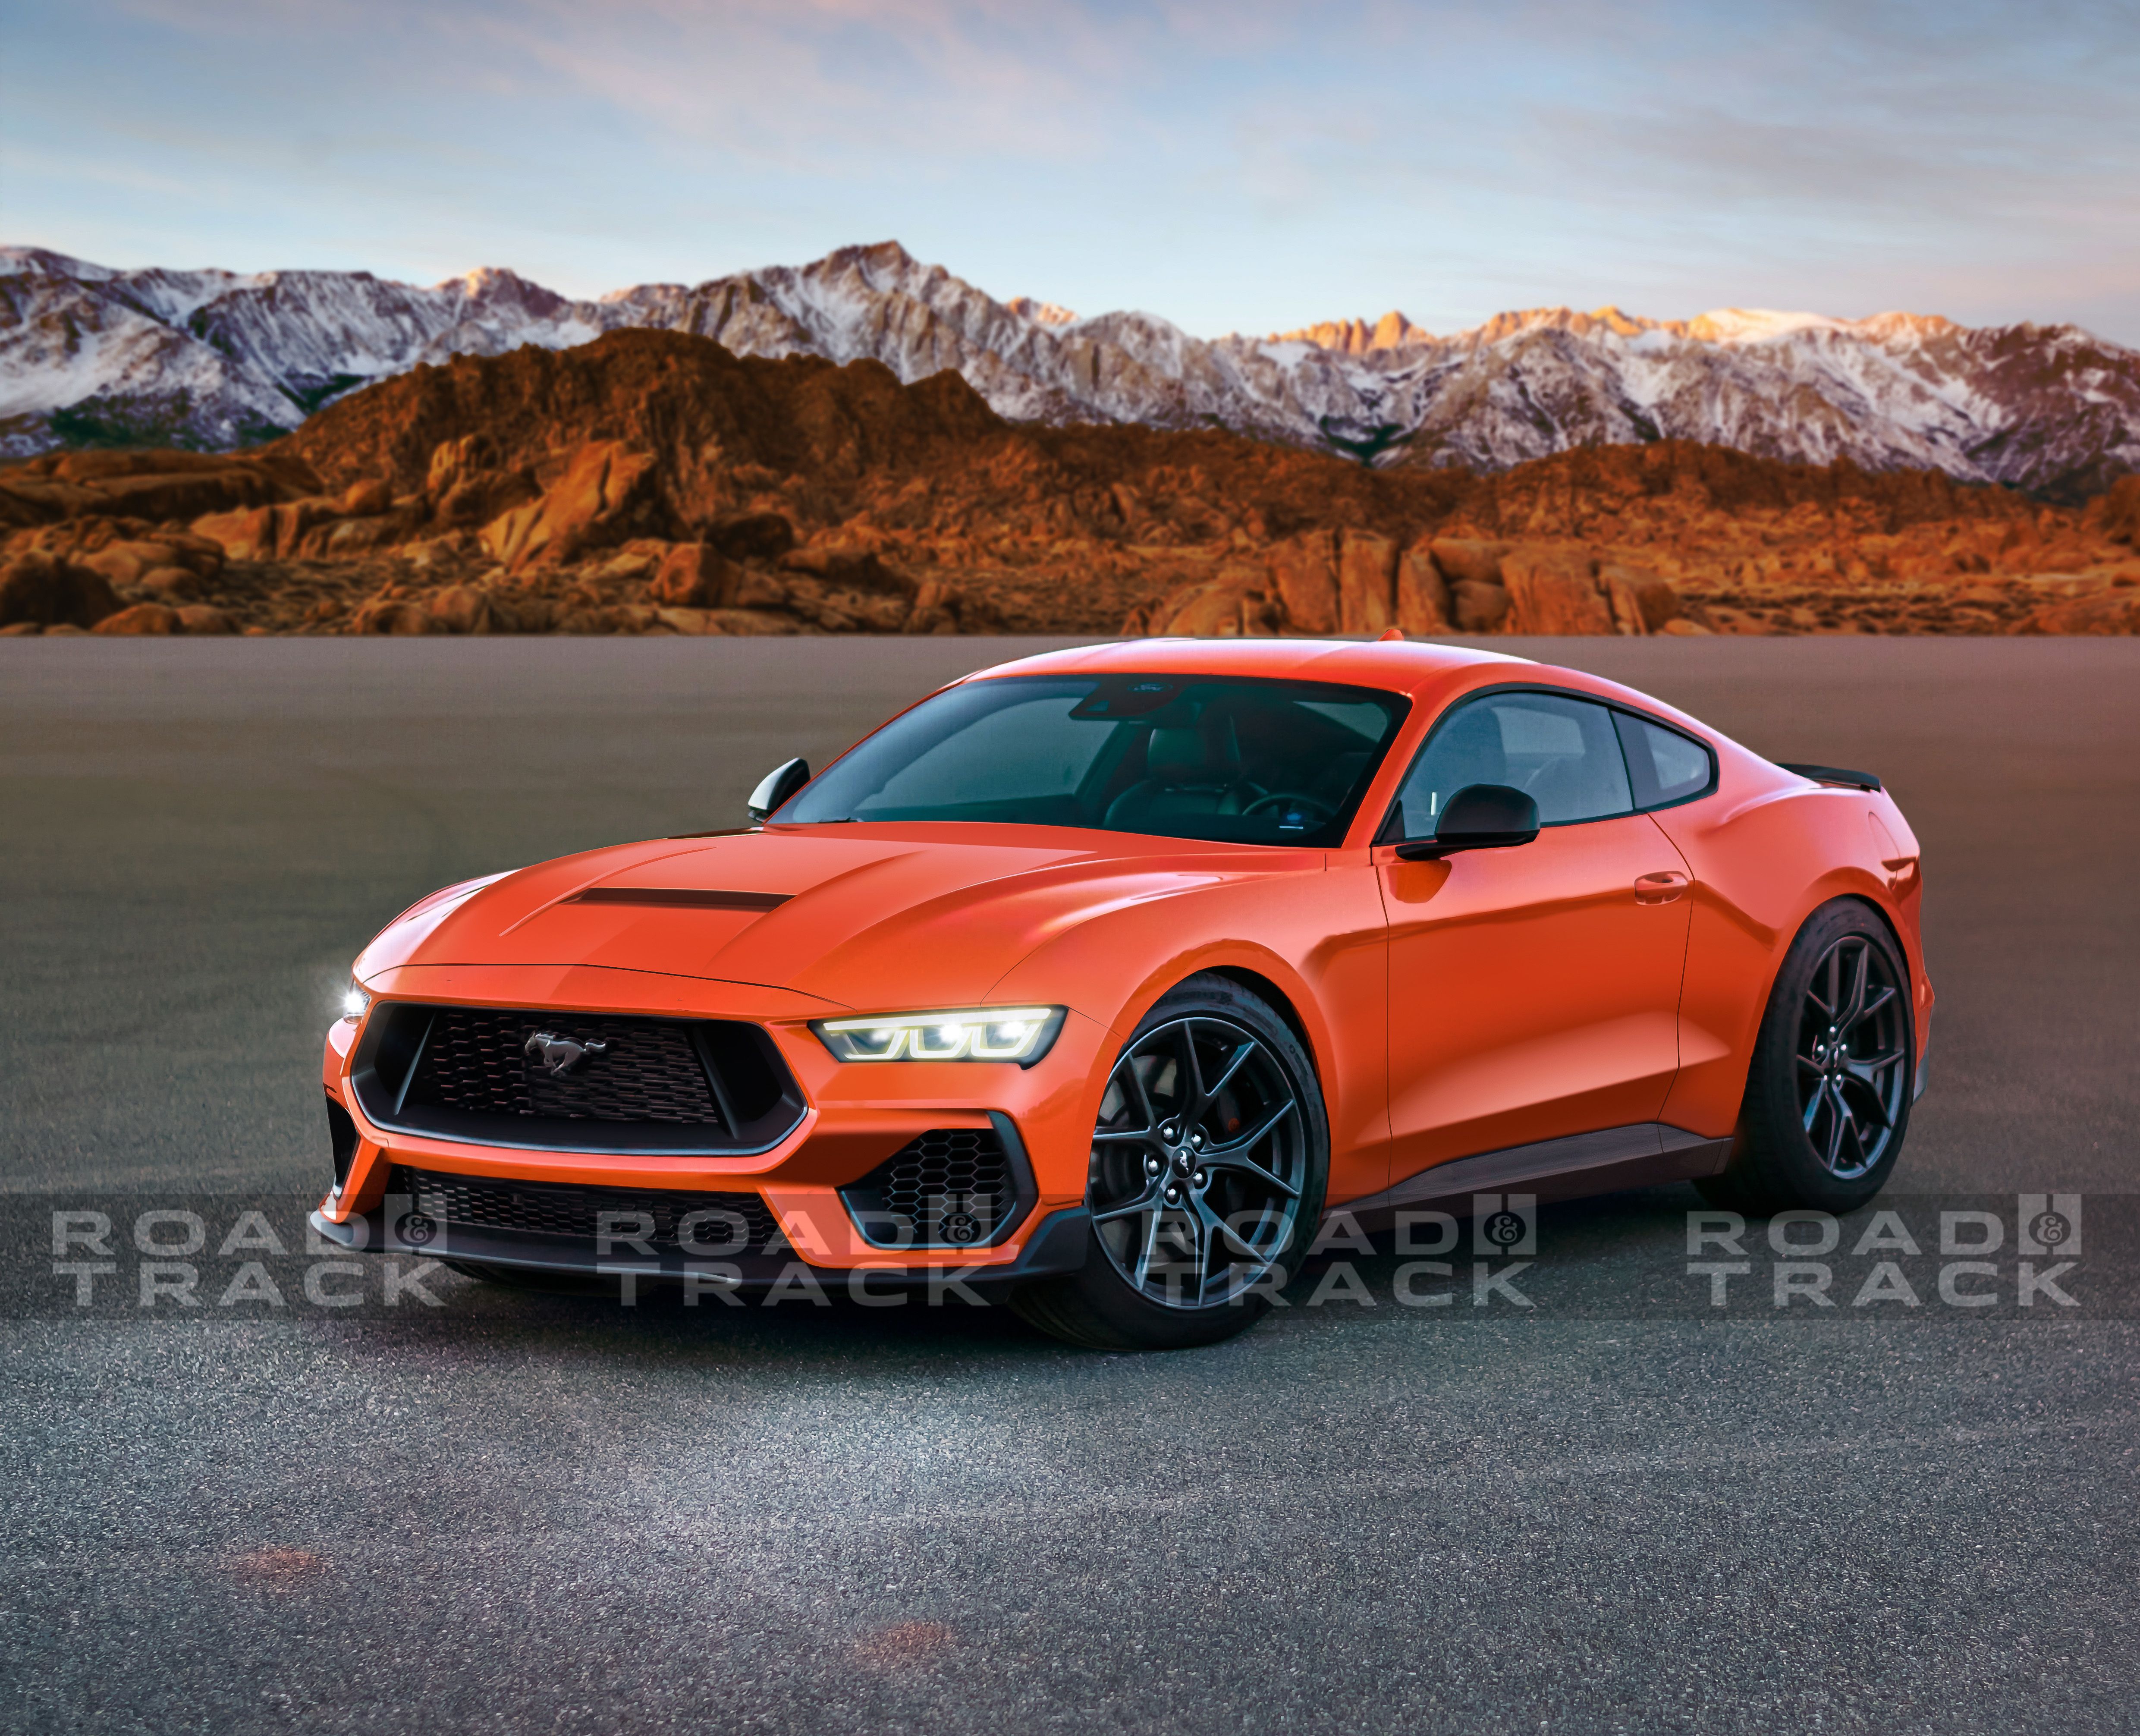 New 2024 Mustang Will Be Revealed at Detroit Show